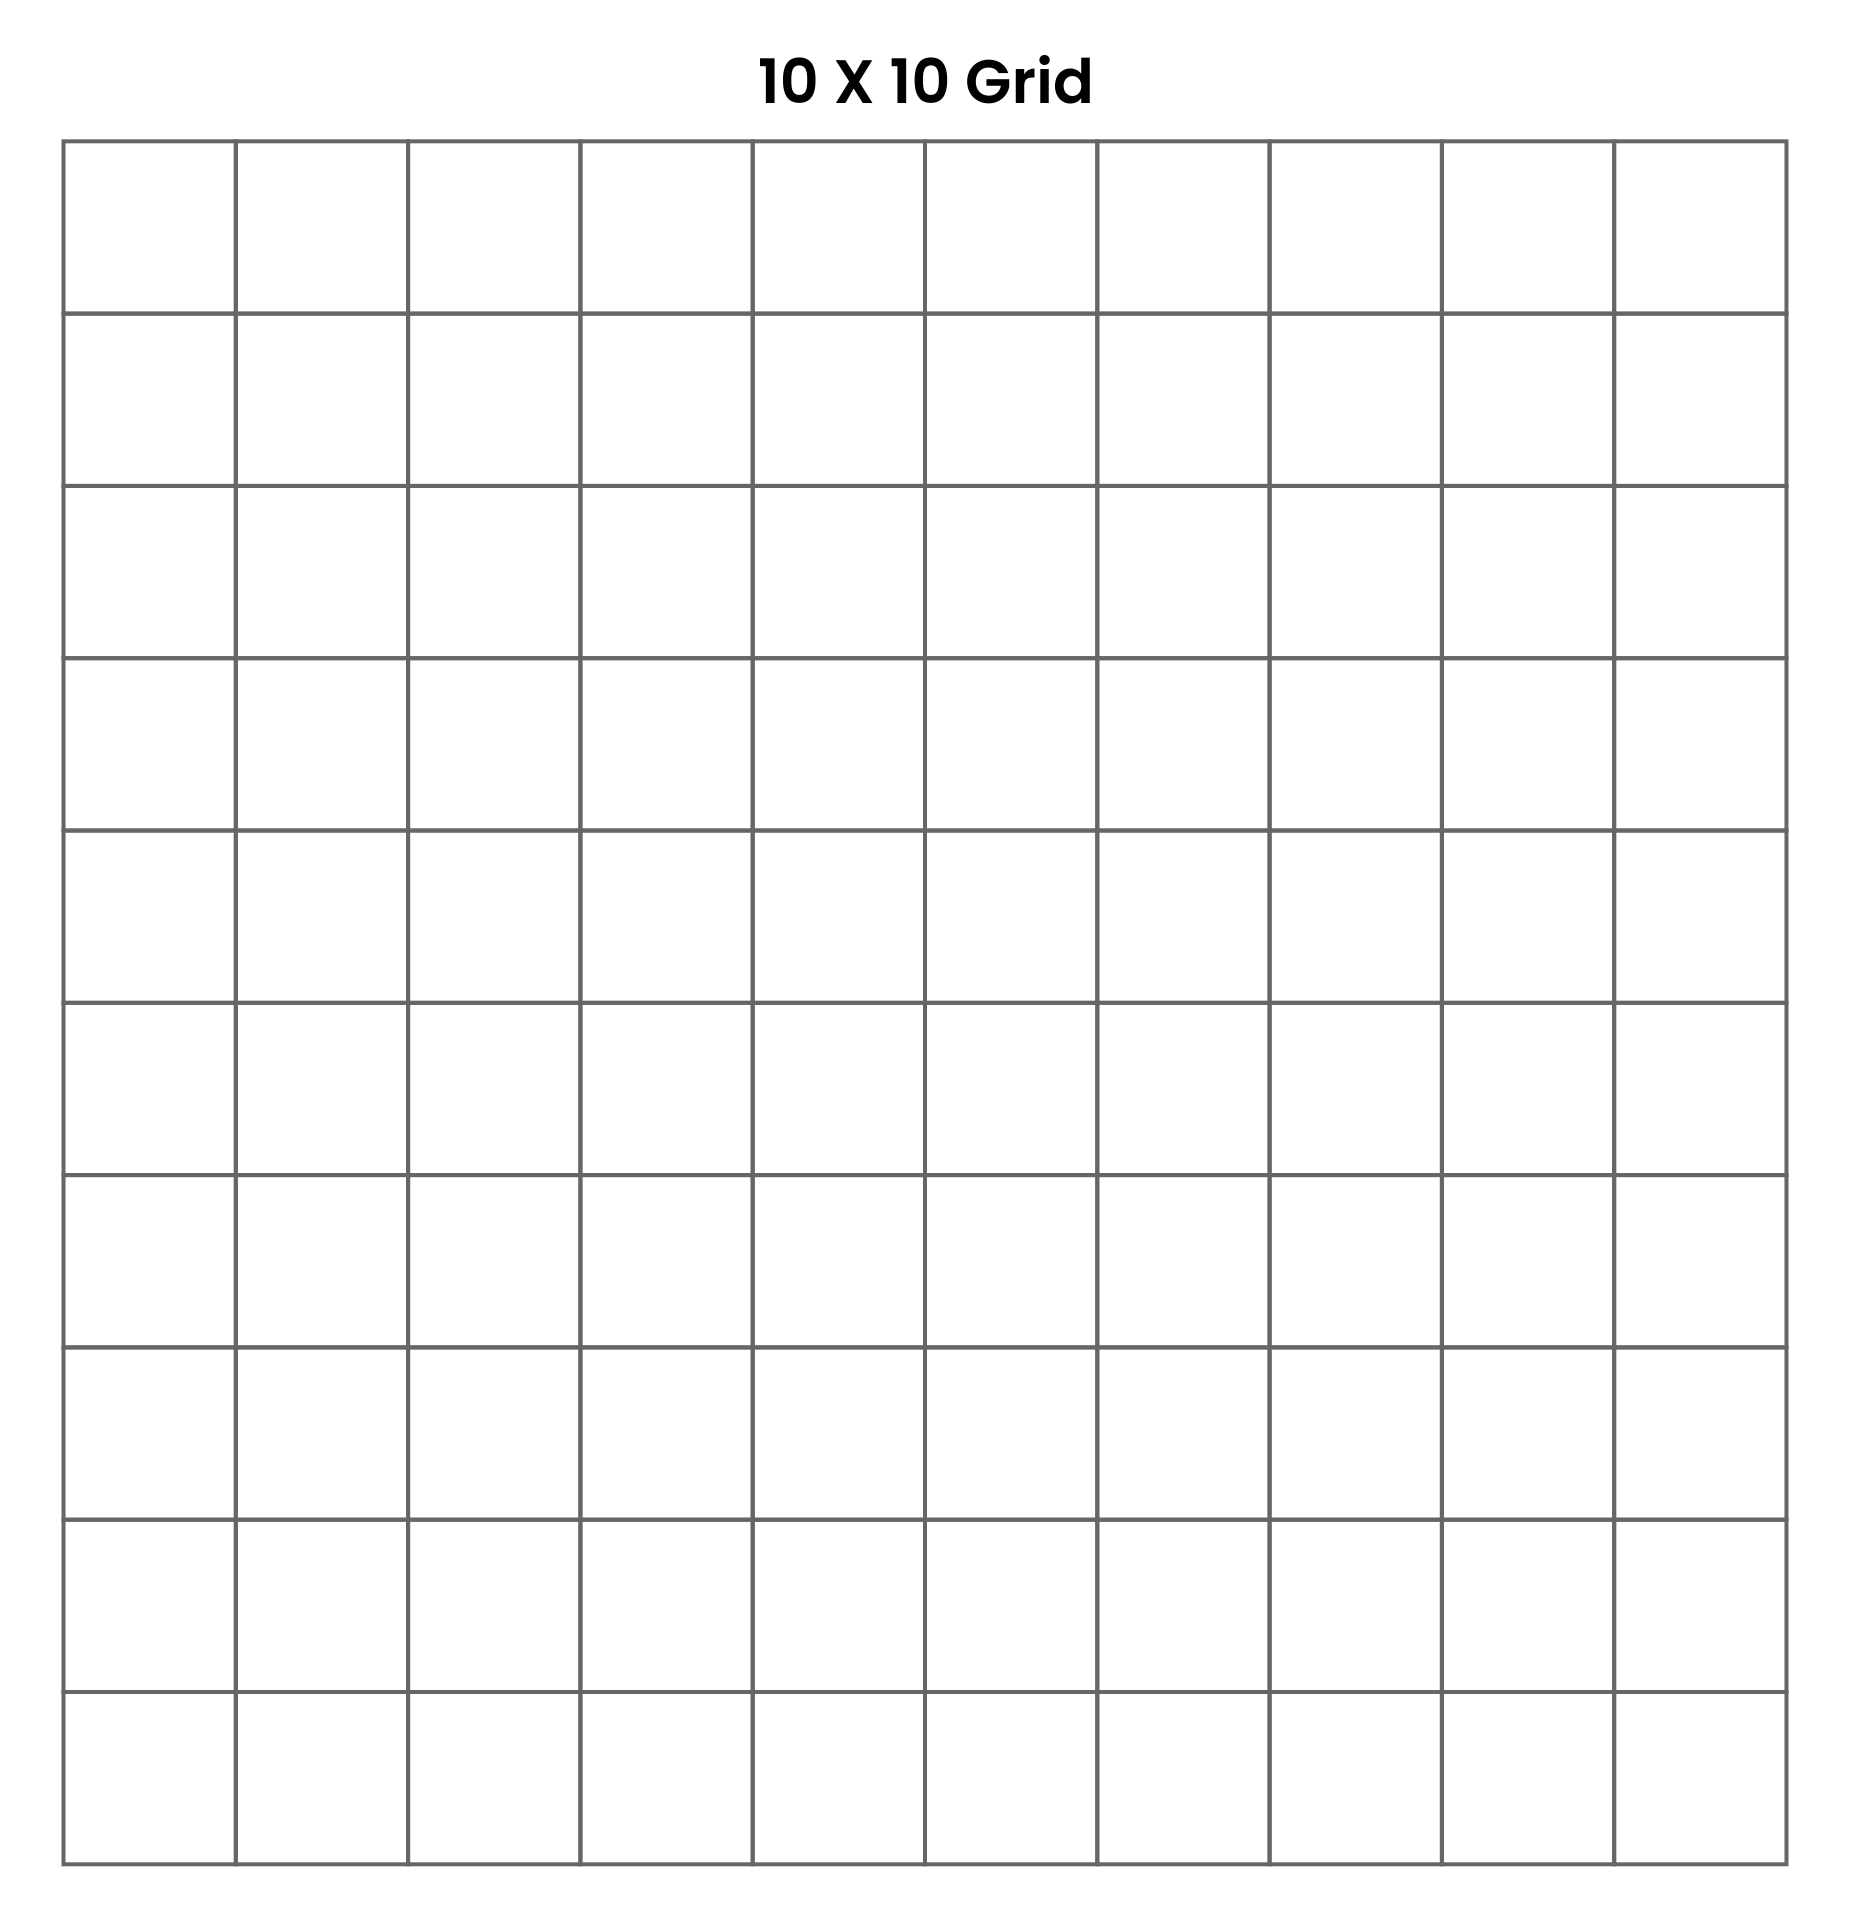 4 Best Images of 10 By 10 Grids Printable - Blank 100 ...